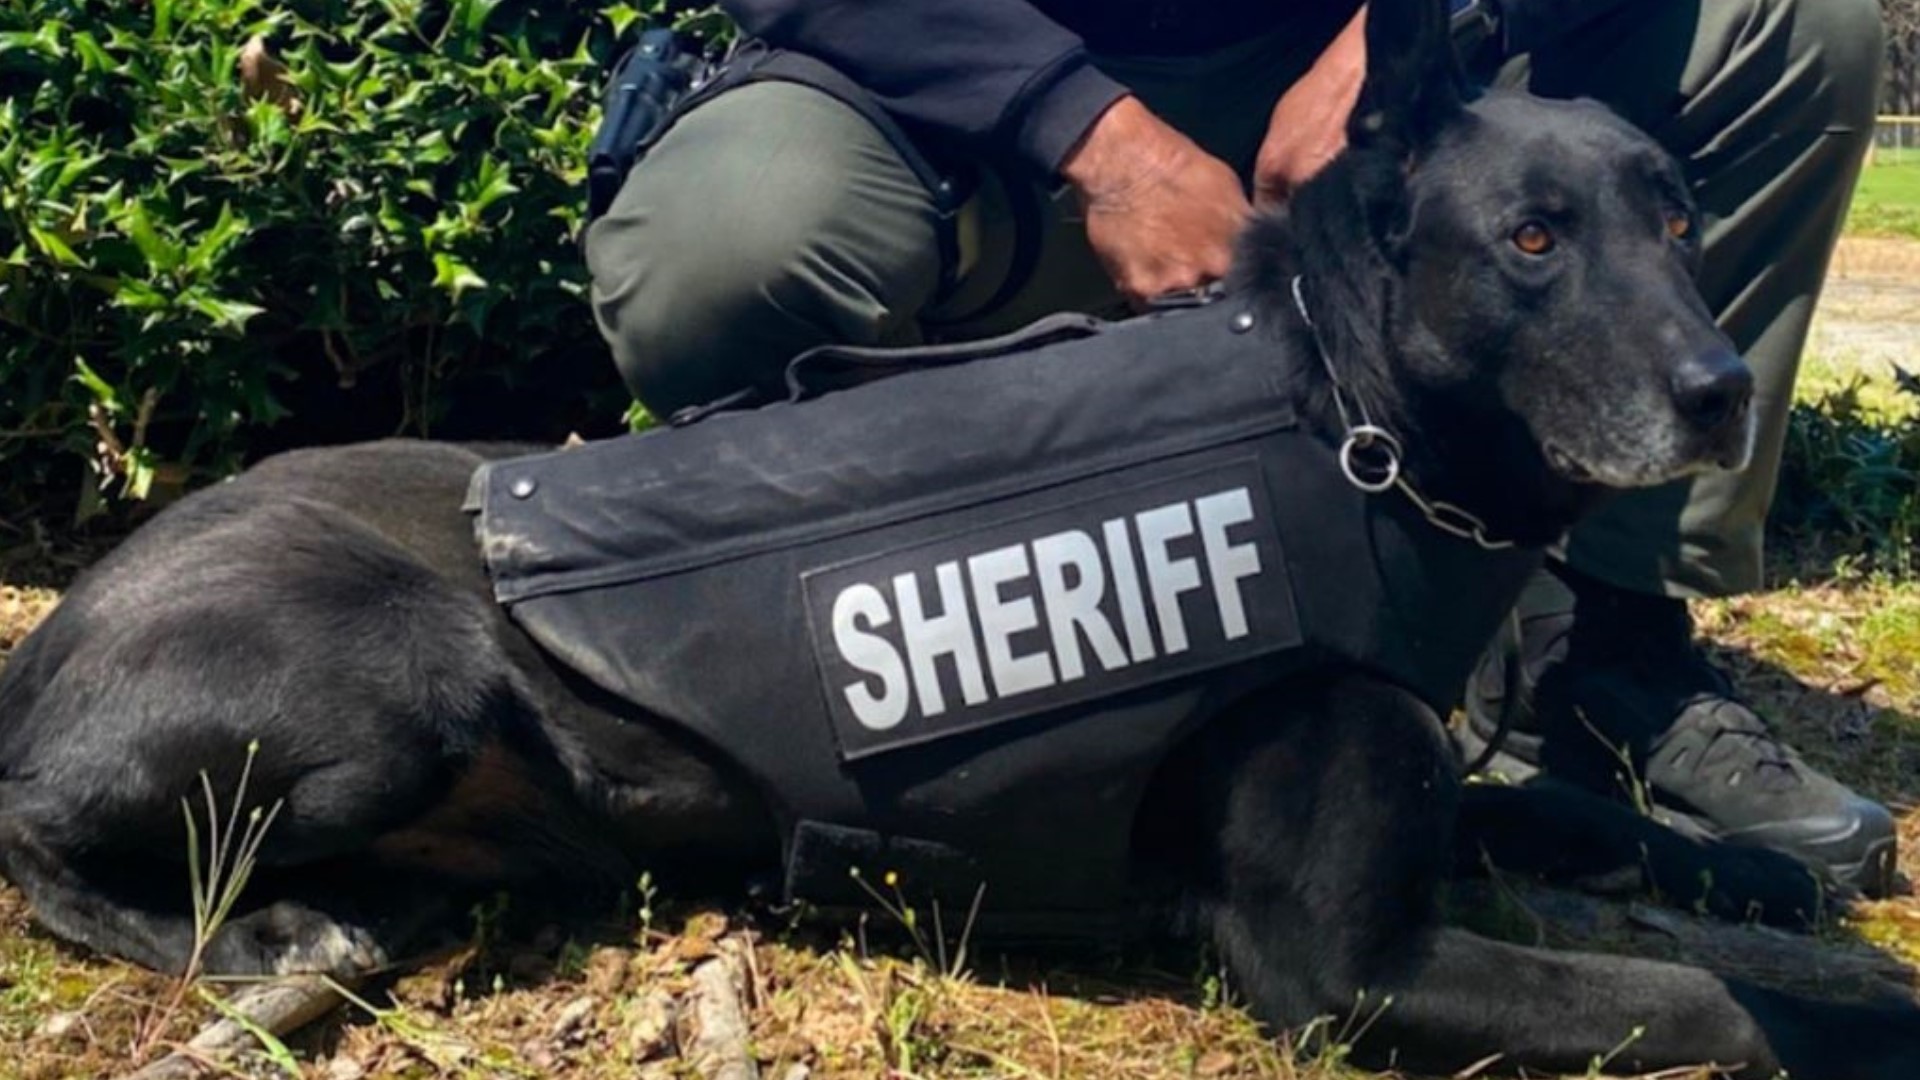 The sheriff's office tweeted Monday that it was "mourning the loss of retired K9 Diesel."